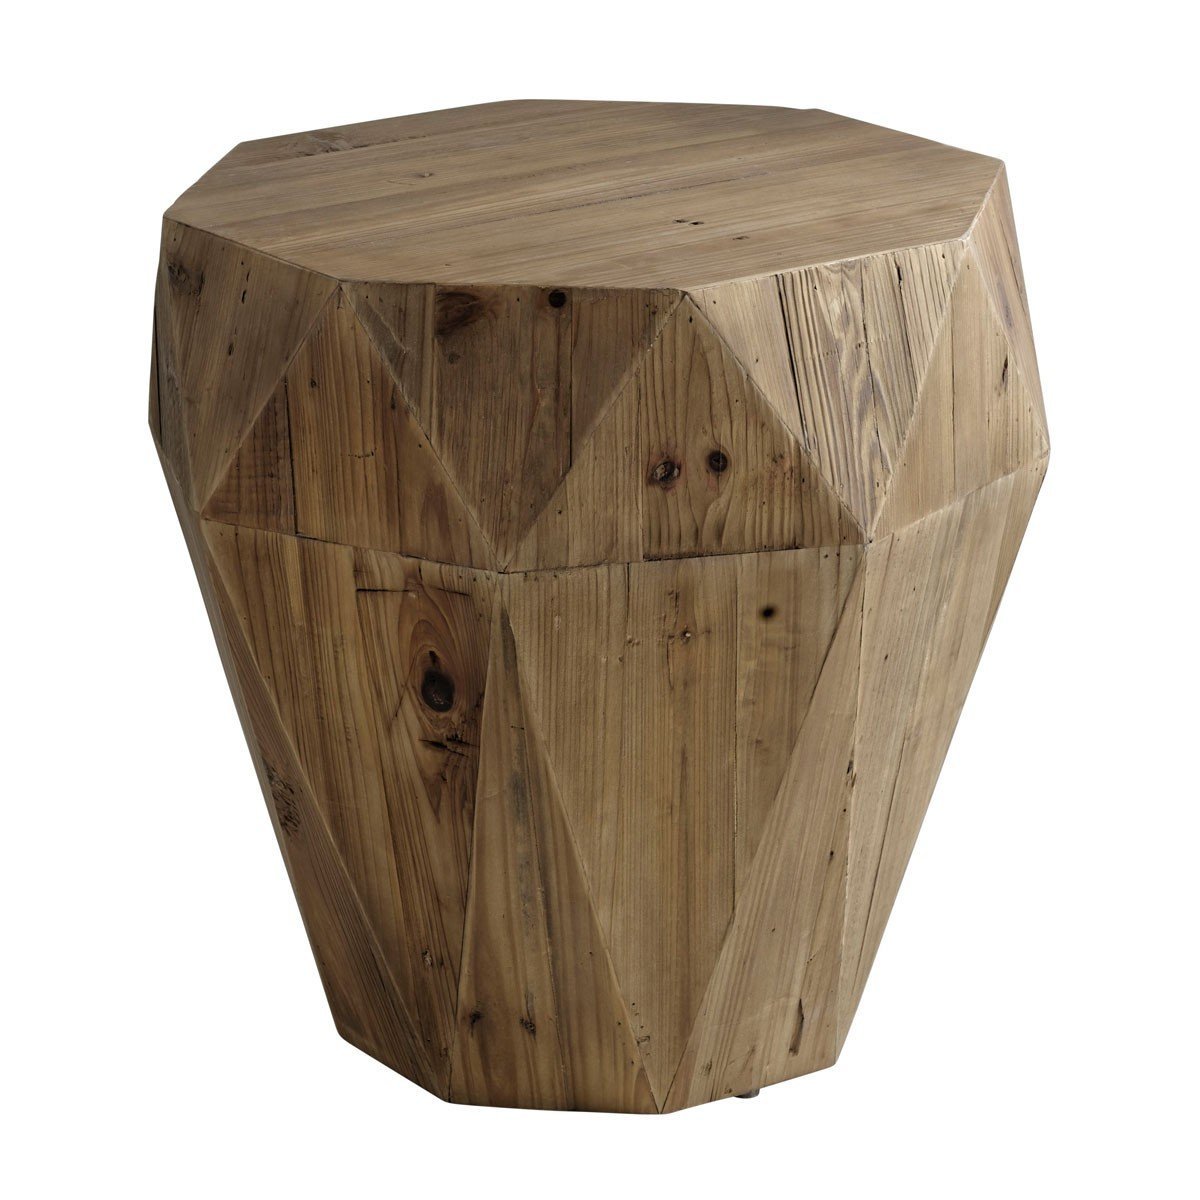  AndrewMartin-Andrew Martin Brancusi Side Table Solid Wood-Brown 813 